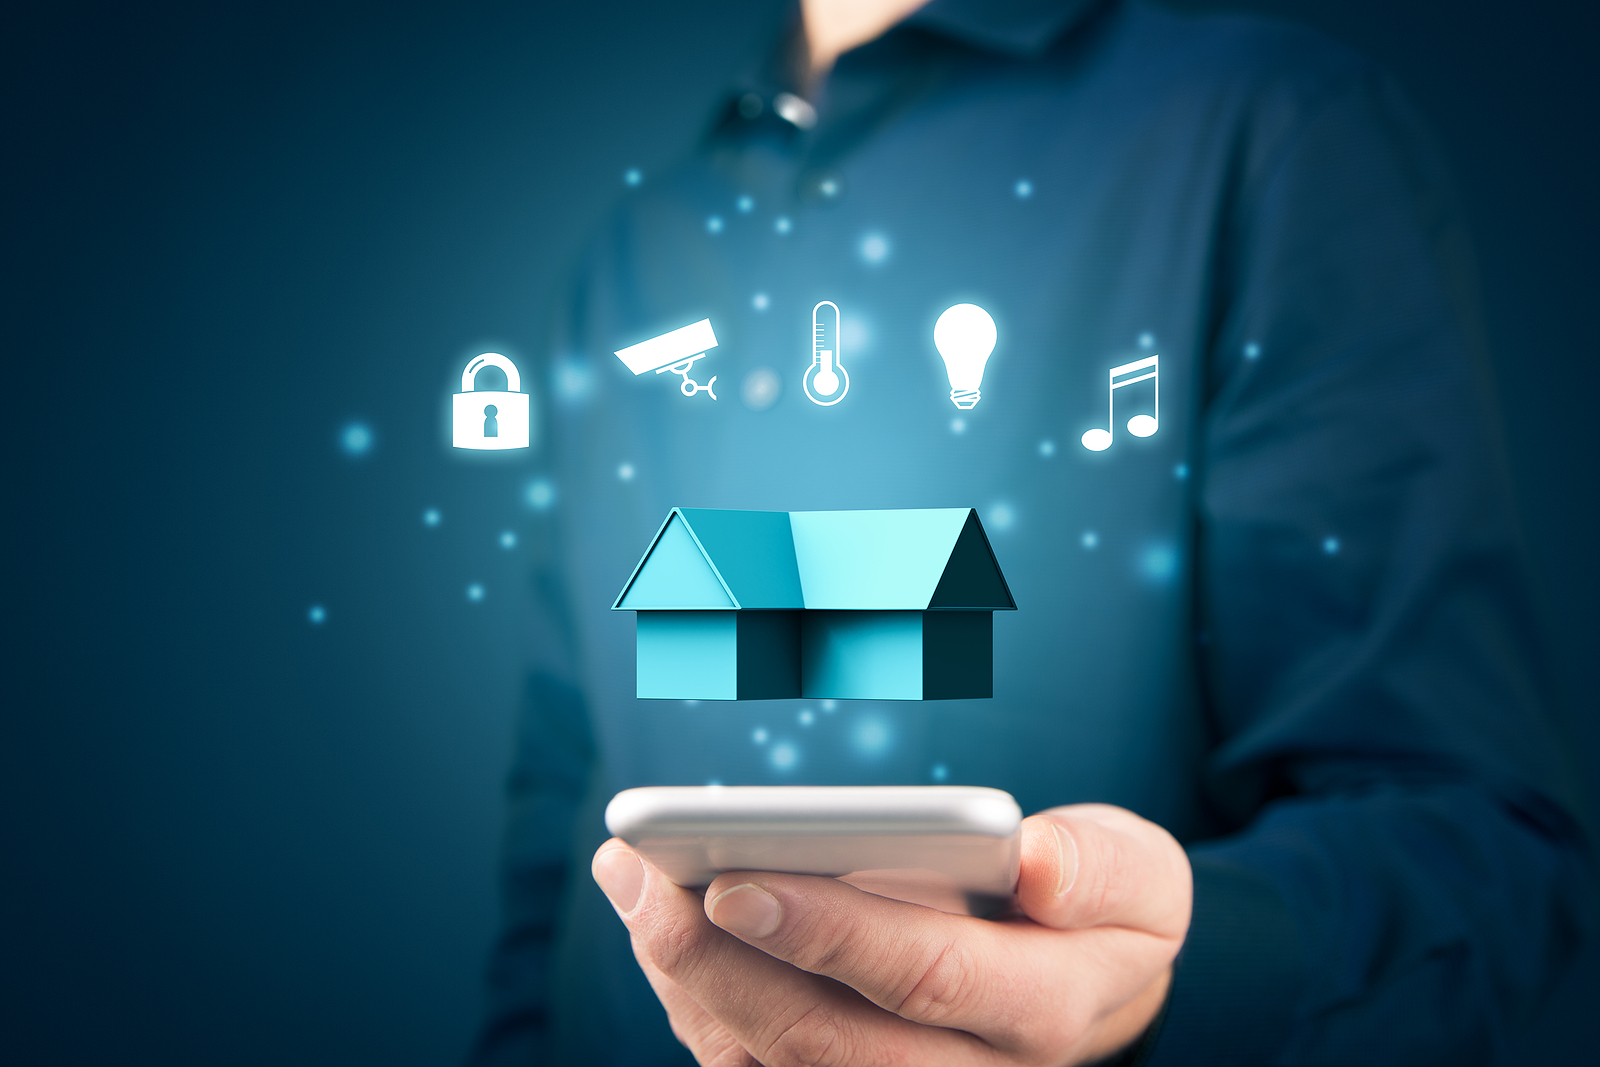  Get Started With Smart Home Technology 